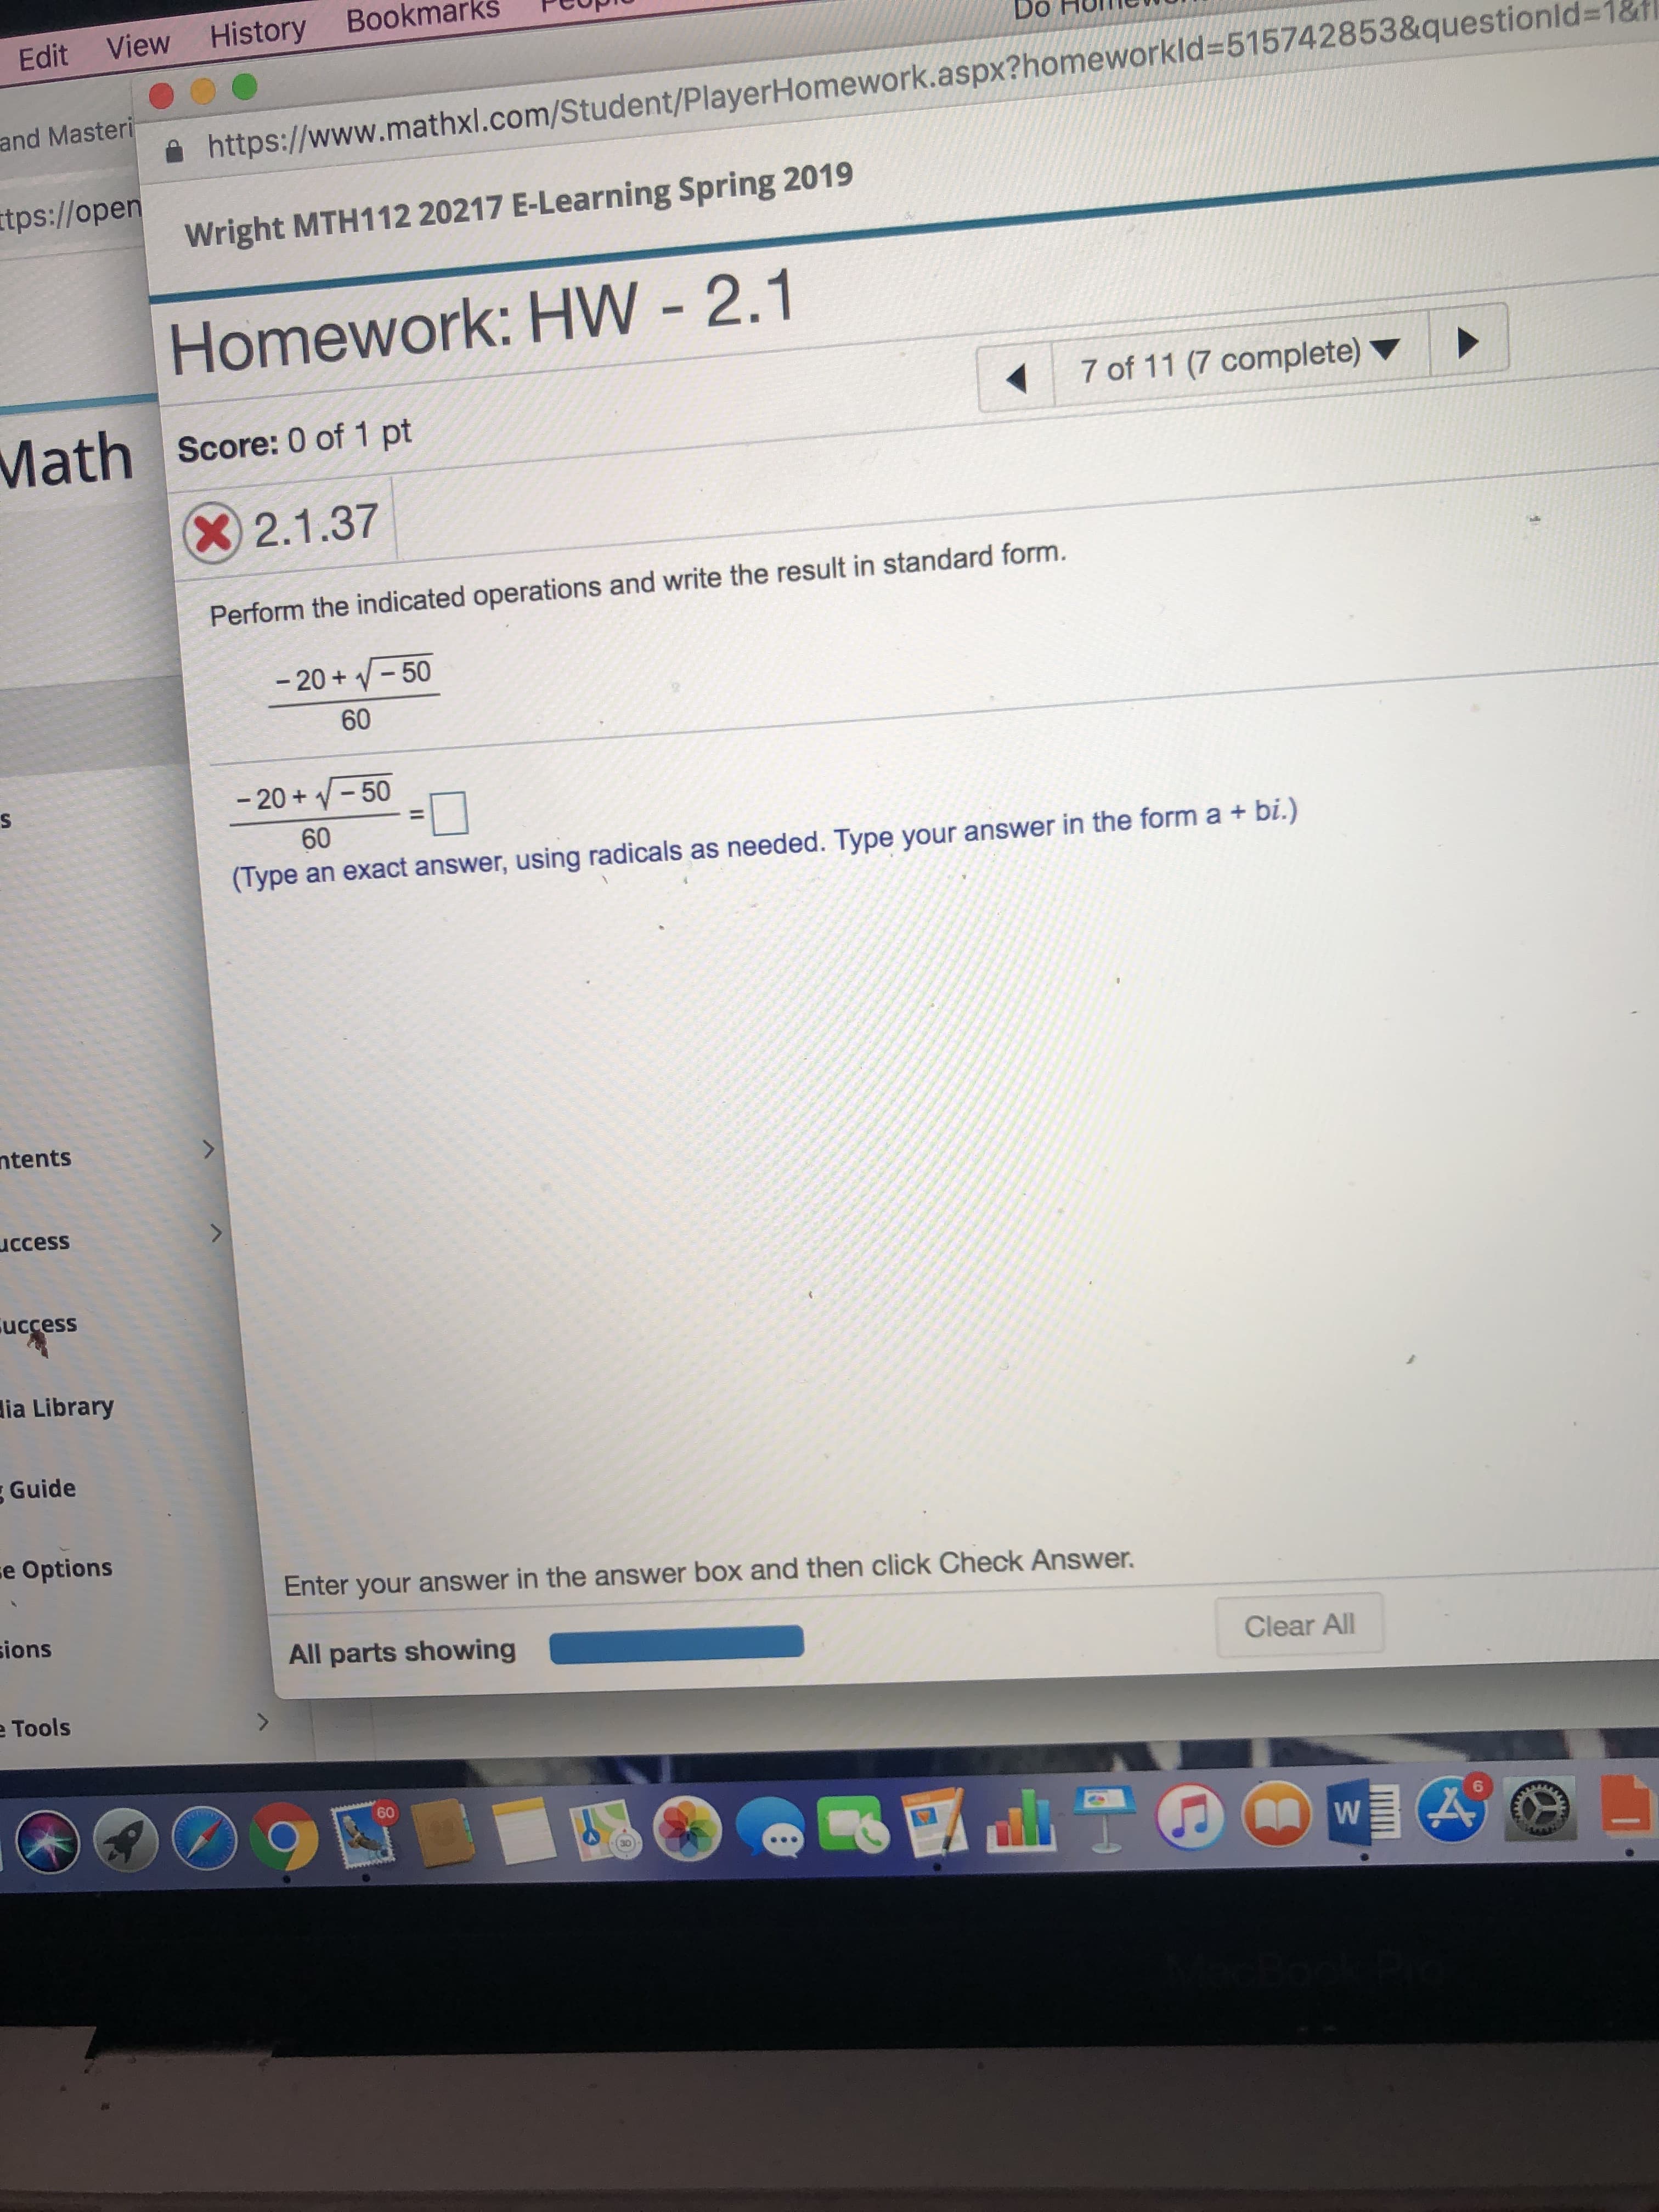 Edit View History Bookmarks plUp
and Masteri
tps://oper
Do HulTle0
i https://www.mathxl.com/Student/PlayerHomework.aspx?homeworkid-515742853&questionld-18
Wright MTH112 20217 E-Learning Spring 2019
Homework: HW - 2.1
Score: 0 of 1 pt
7 of 11 (7 complete)
2.1.37
Perform the indicated operations and write the result in standard form.
-20V-50
60
-20+ 50
60
iype an exact answer, using radicals as needed. Type your answer i he form a + bi.)
ur answer in the form a +bi.)
tents
ccess
uccess
ia Library
Guide
e Options
Enter your answer in the answer box and then click Check Answer.
ions
All parts showing
Clear All
Tools
60
6
